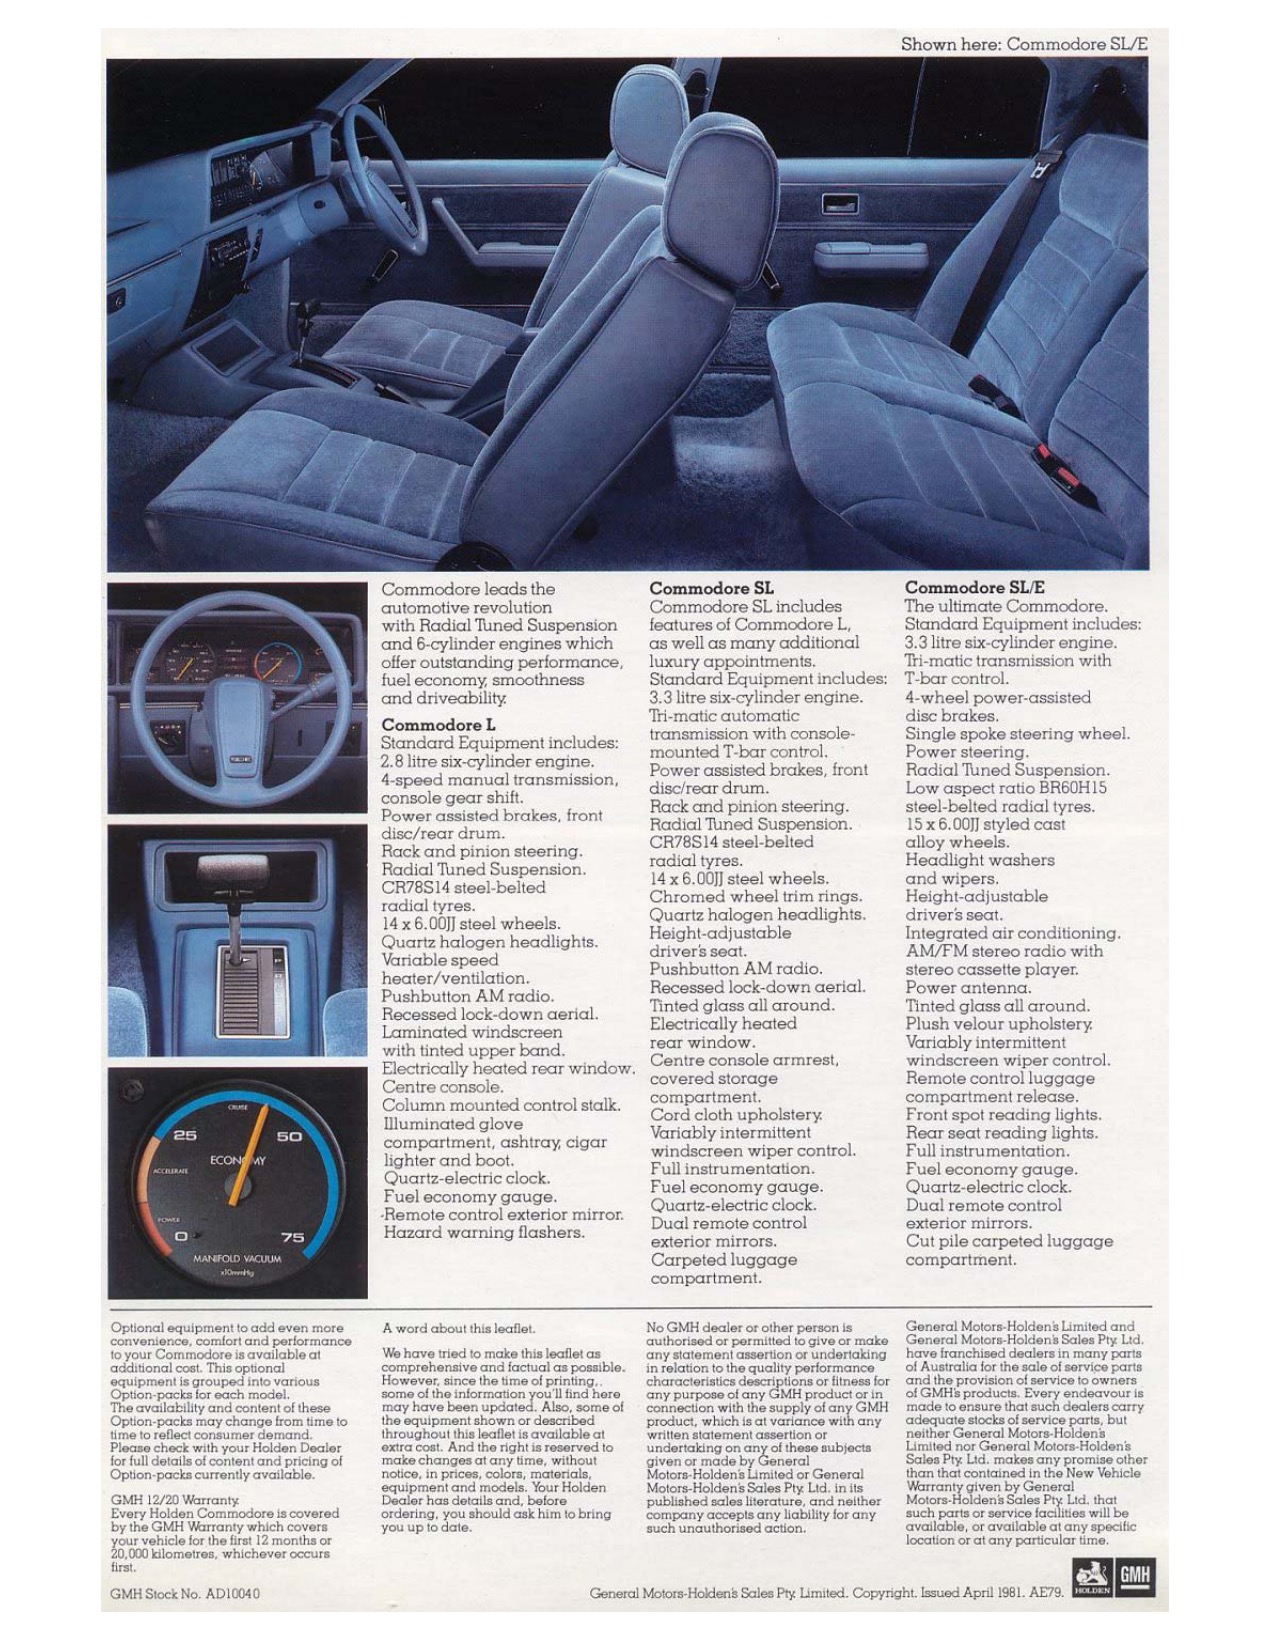 1980 Holden VC Commodore Brochure Page 1